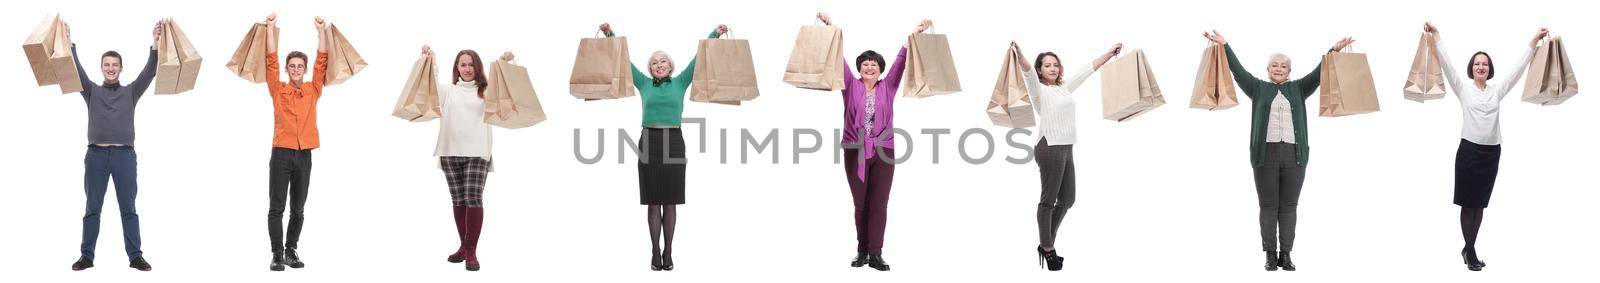 collage of shoppers holding shopping bags high